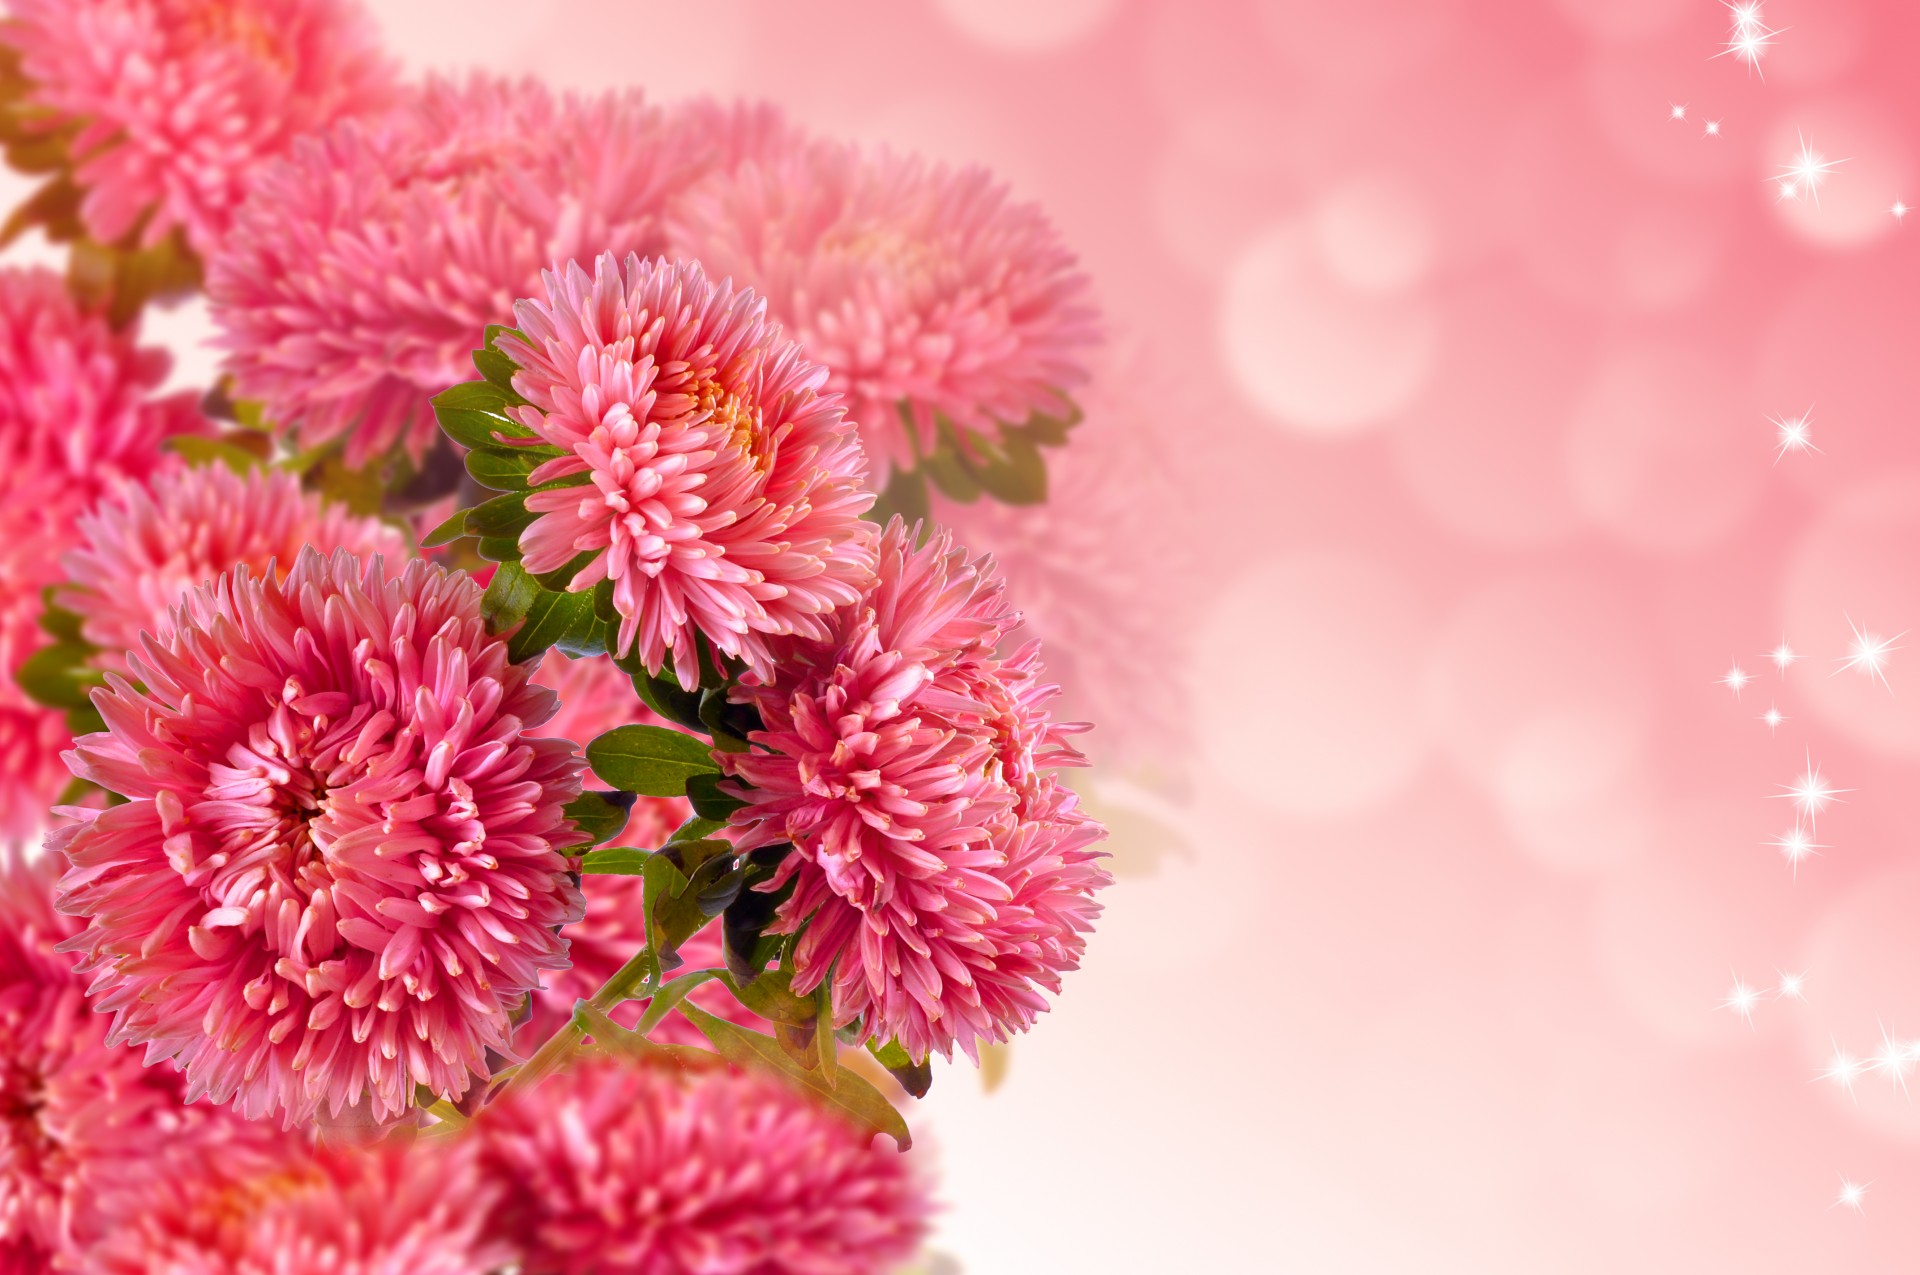 flowers background wallpaper free photo